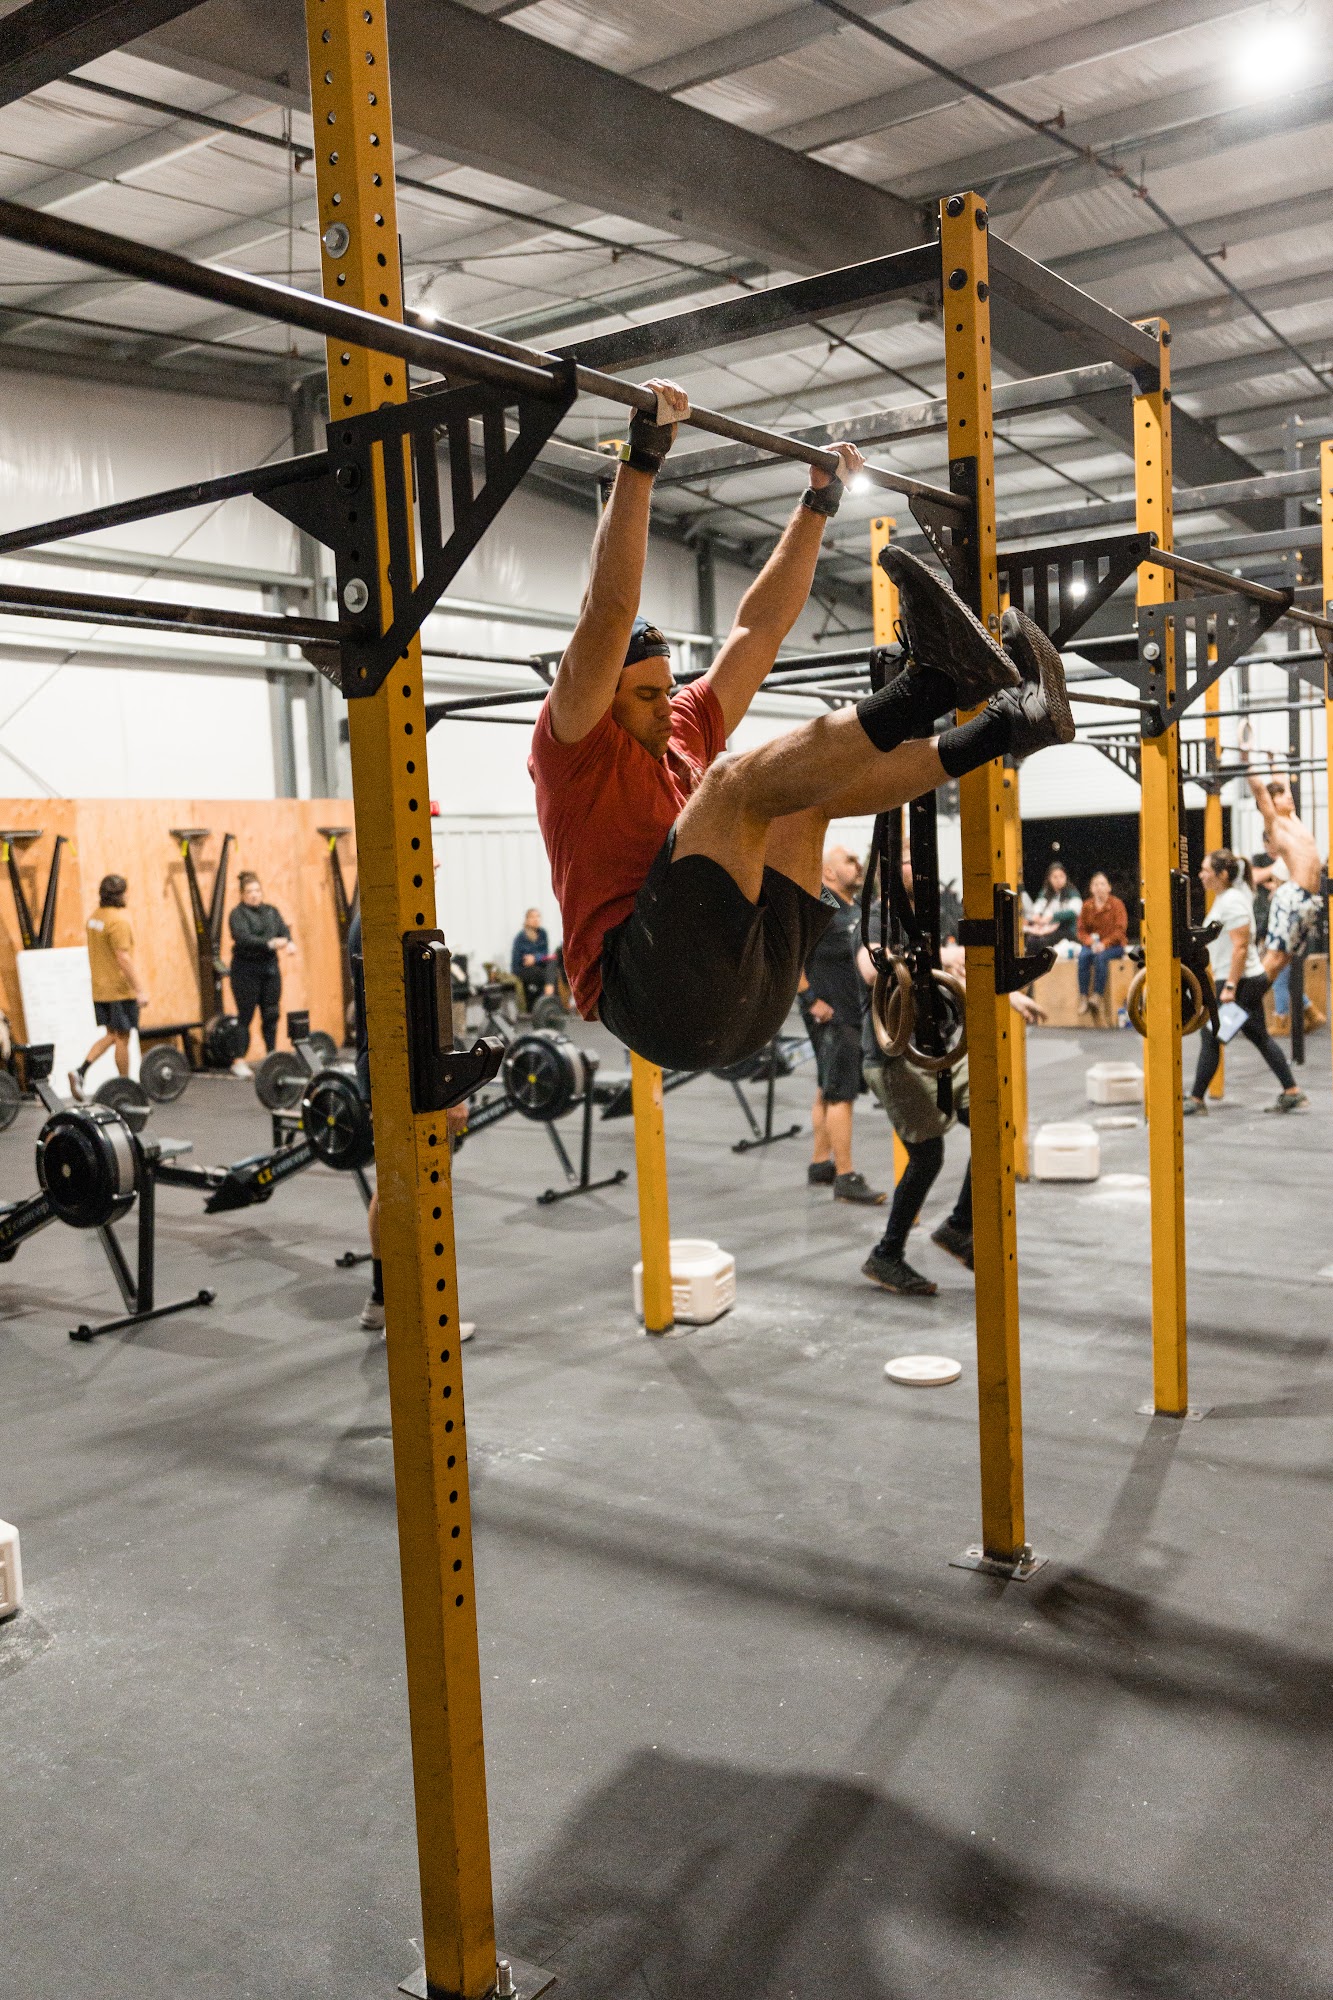 R6 CrossFit - The #1 Fitness Gym in Turlock, Ca.